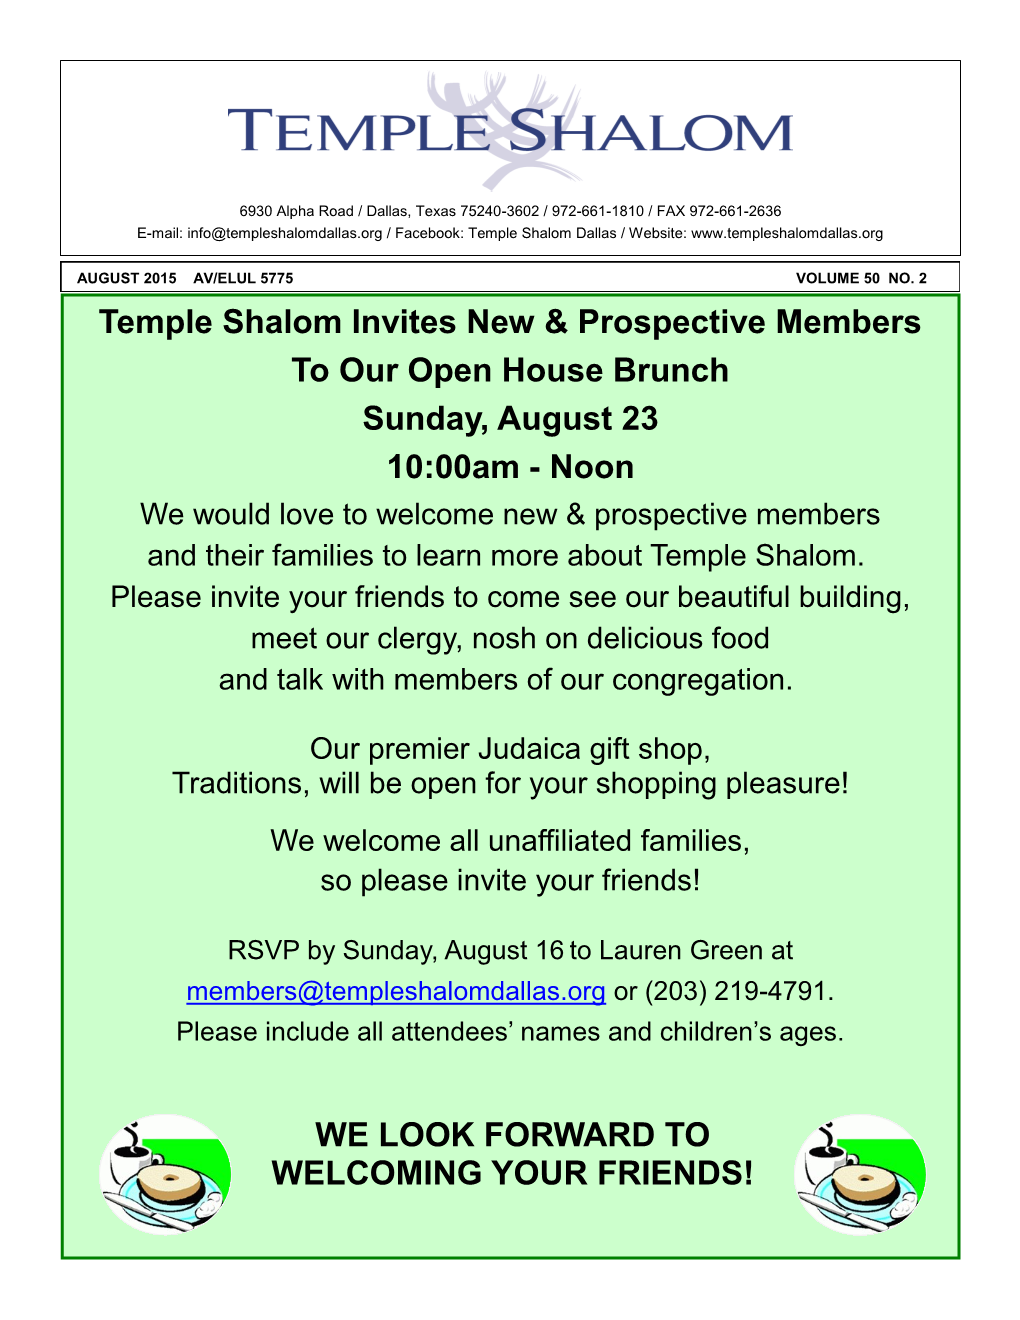 Temple Shalom Invites New & Prospective Members to Our Open